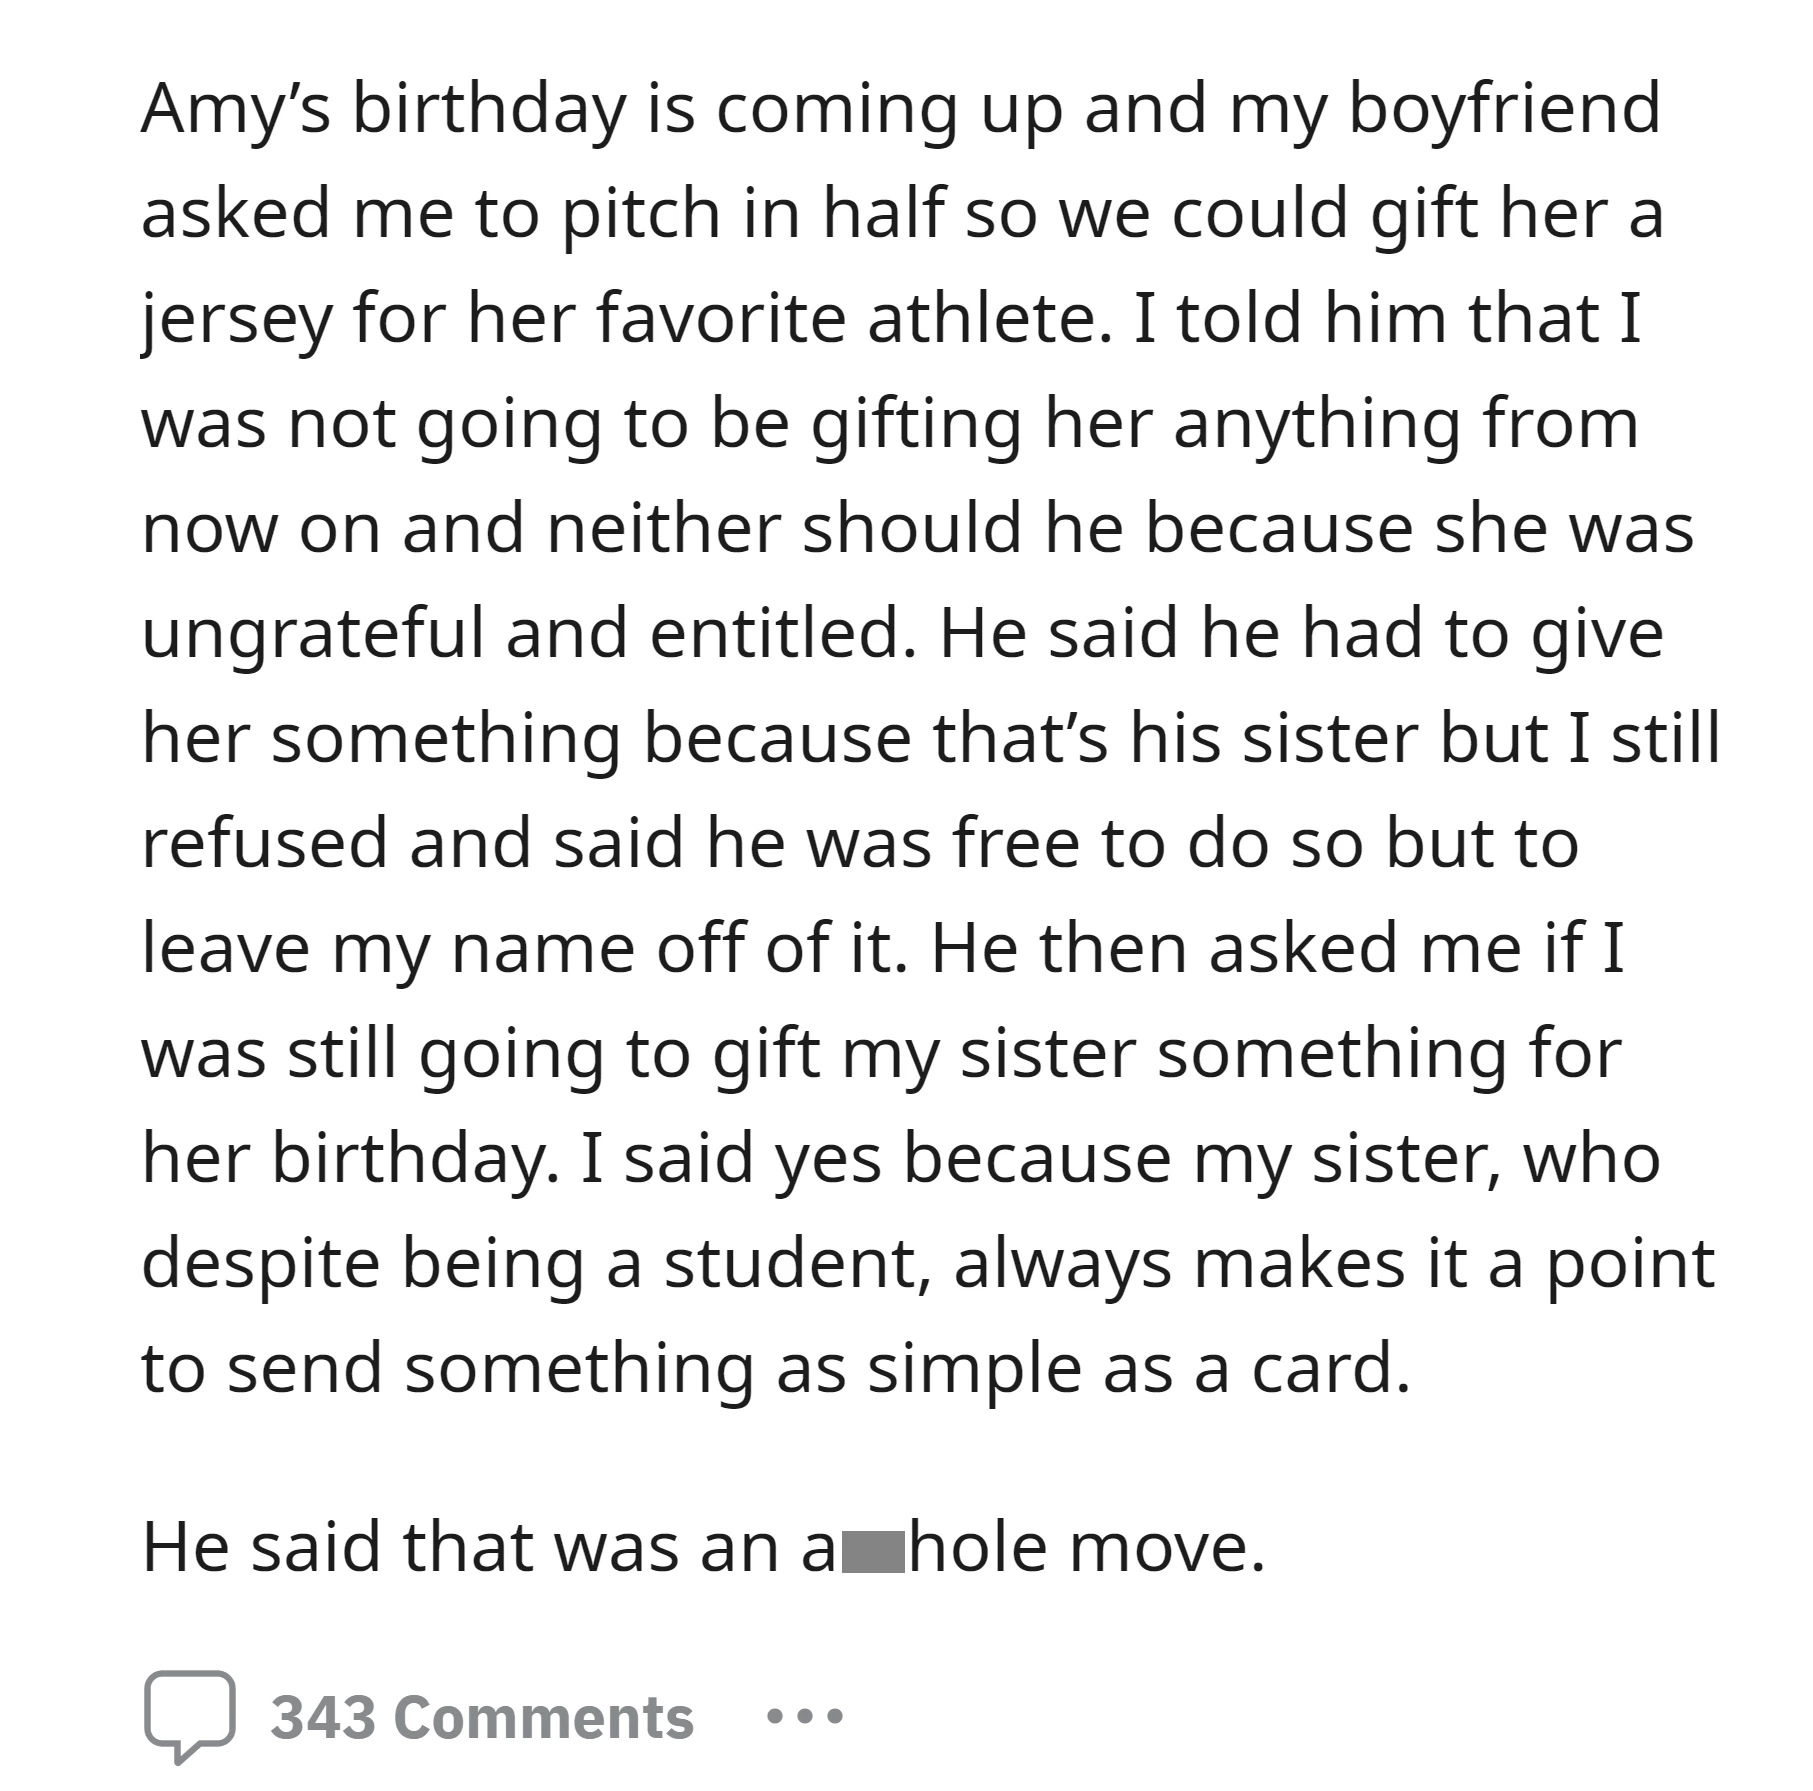 OP refused to gift her boufriend's ungrateful sister on her birthday